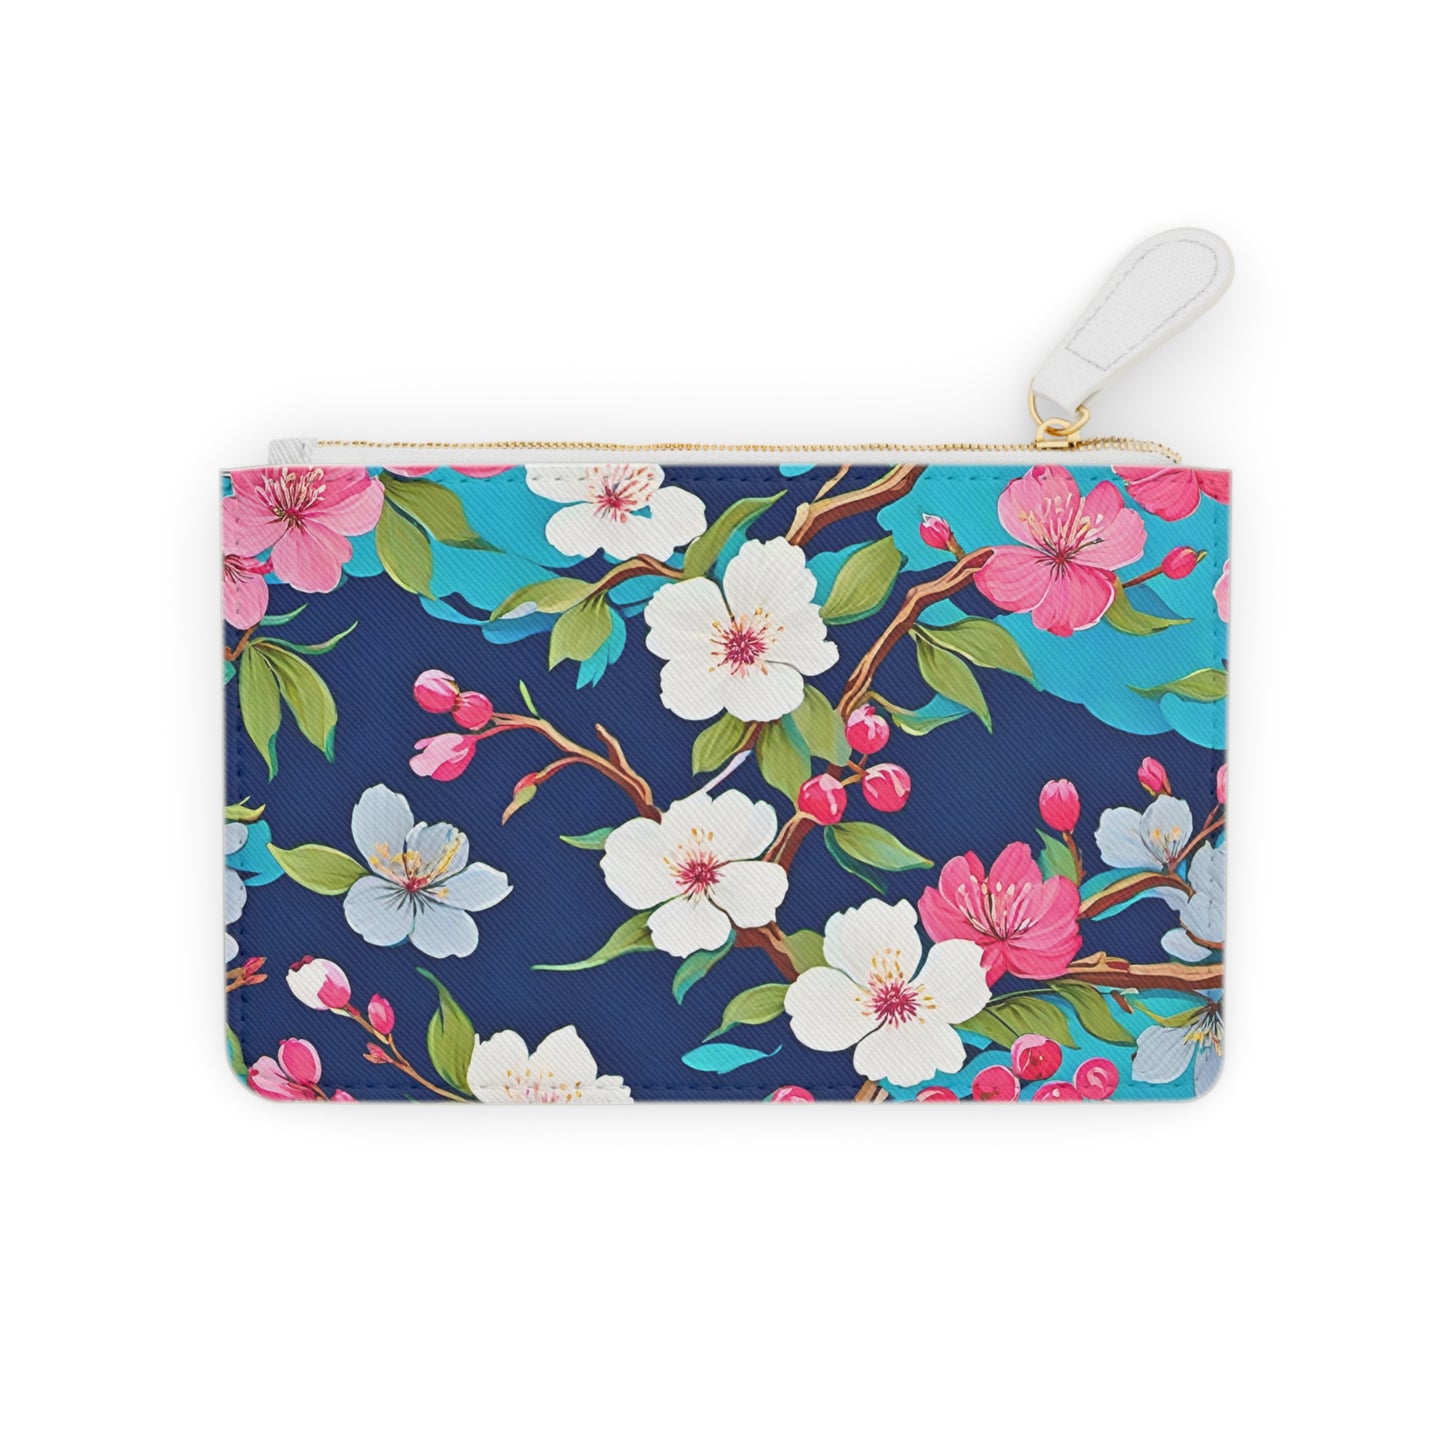 Cherry Blossoms Japanese Floral Pink Coin Purse Mini Pouch Clutch Bag